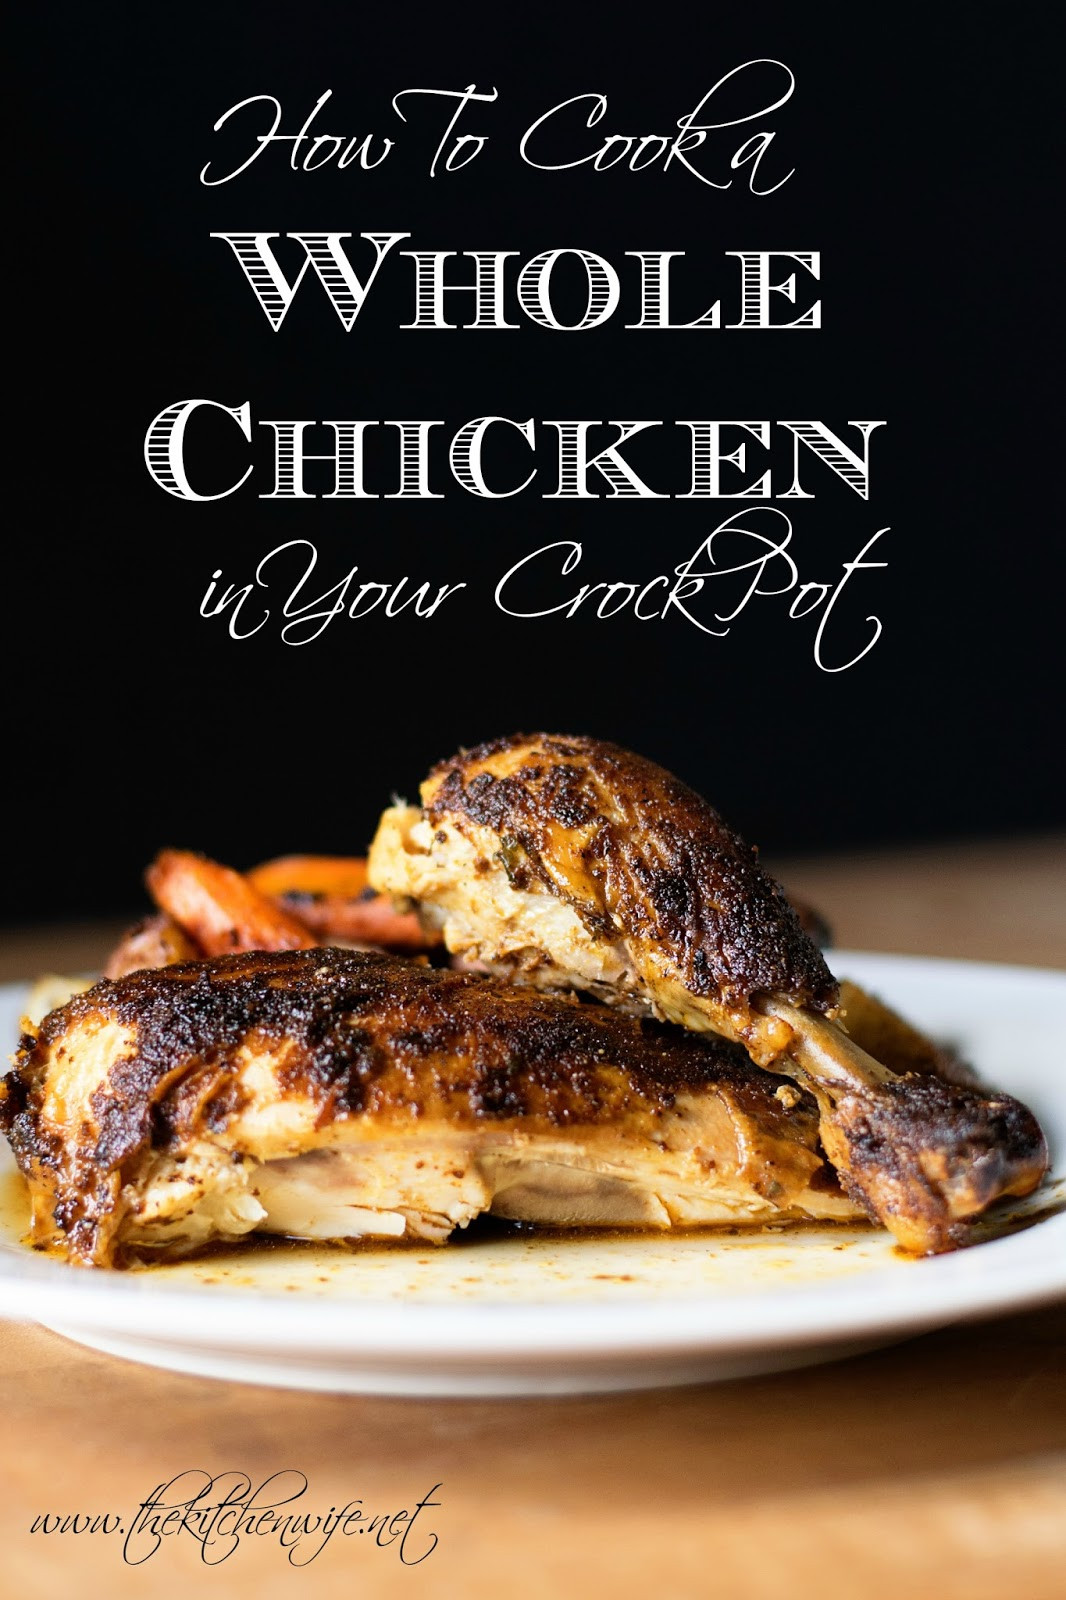 Whole Chicken Crock Pot Recipe
 How to Cook a Whole Chicken in Crockpot Recipe The